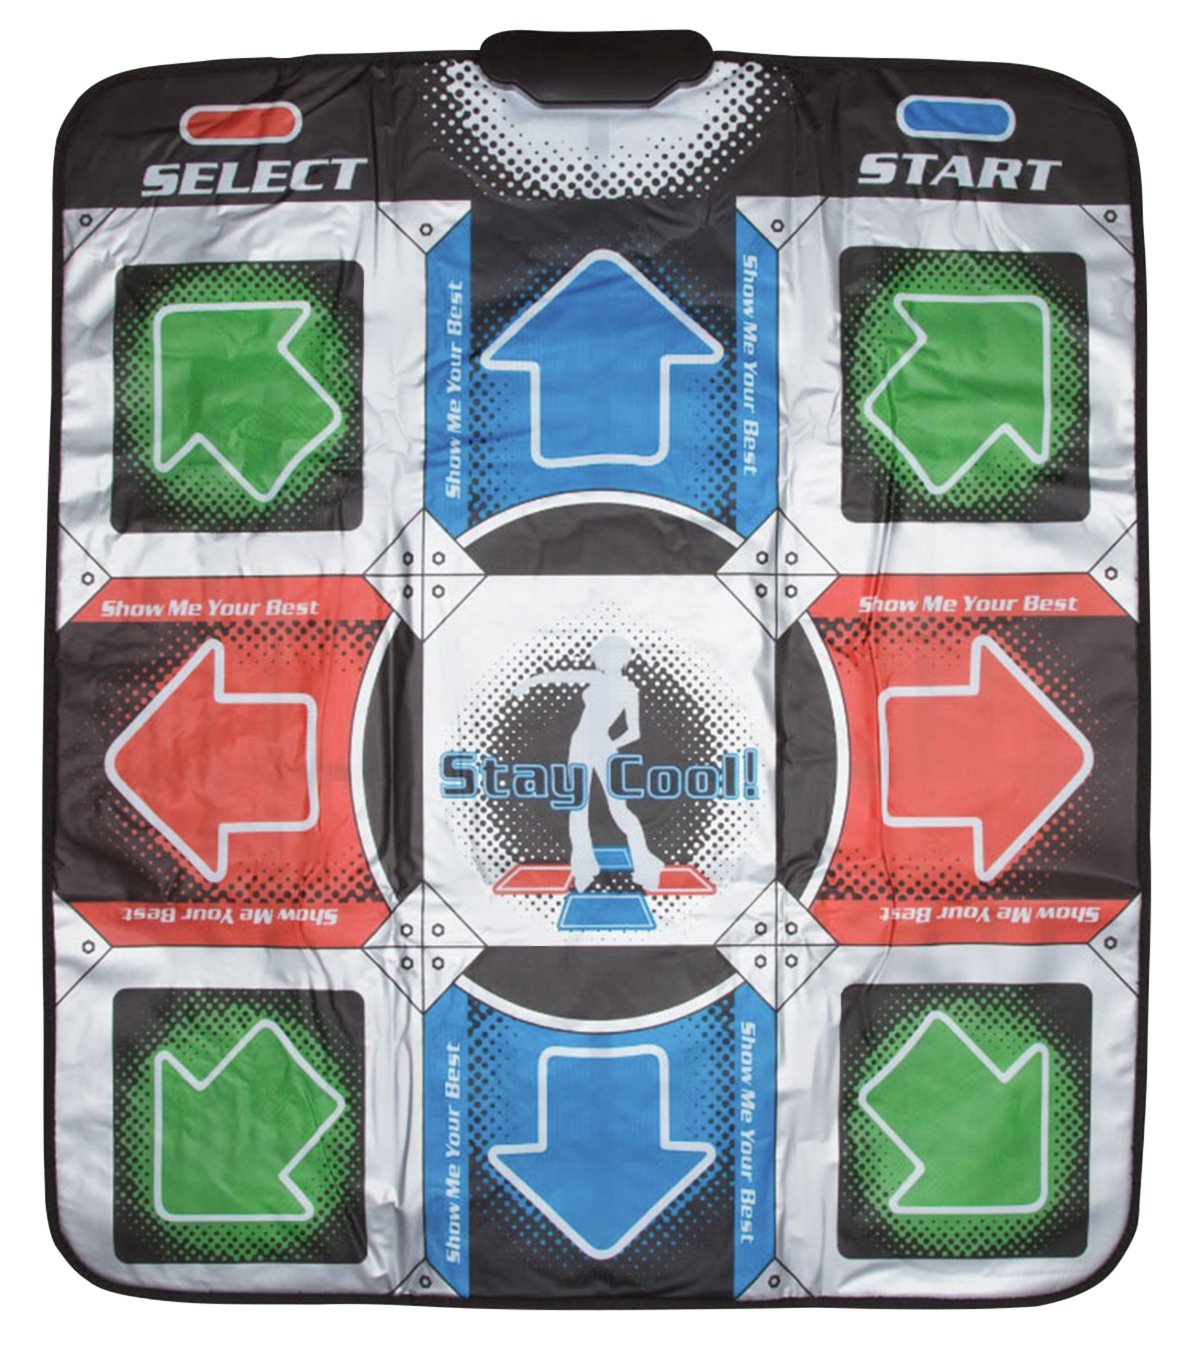 Plug and Play Retro Gaming Dance Mat with inbuilt Songs 